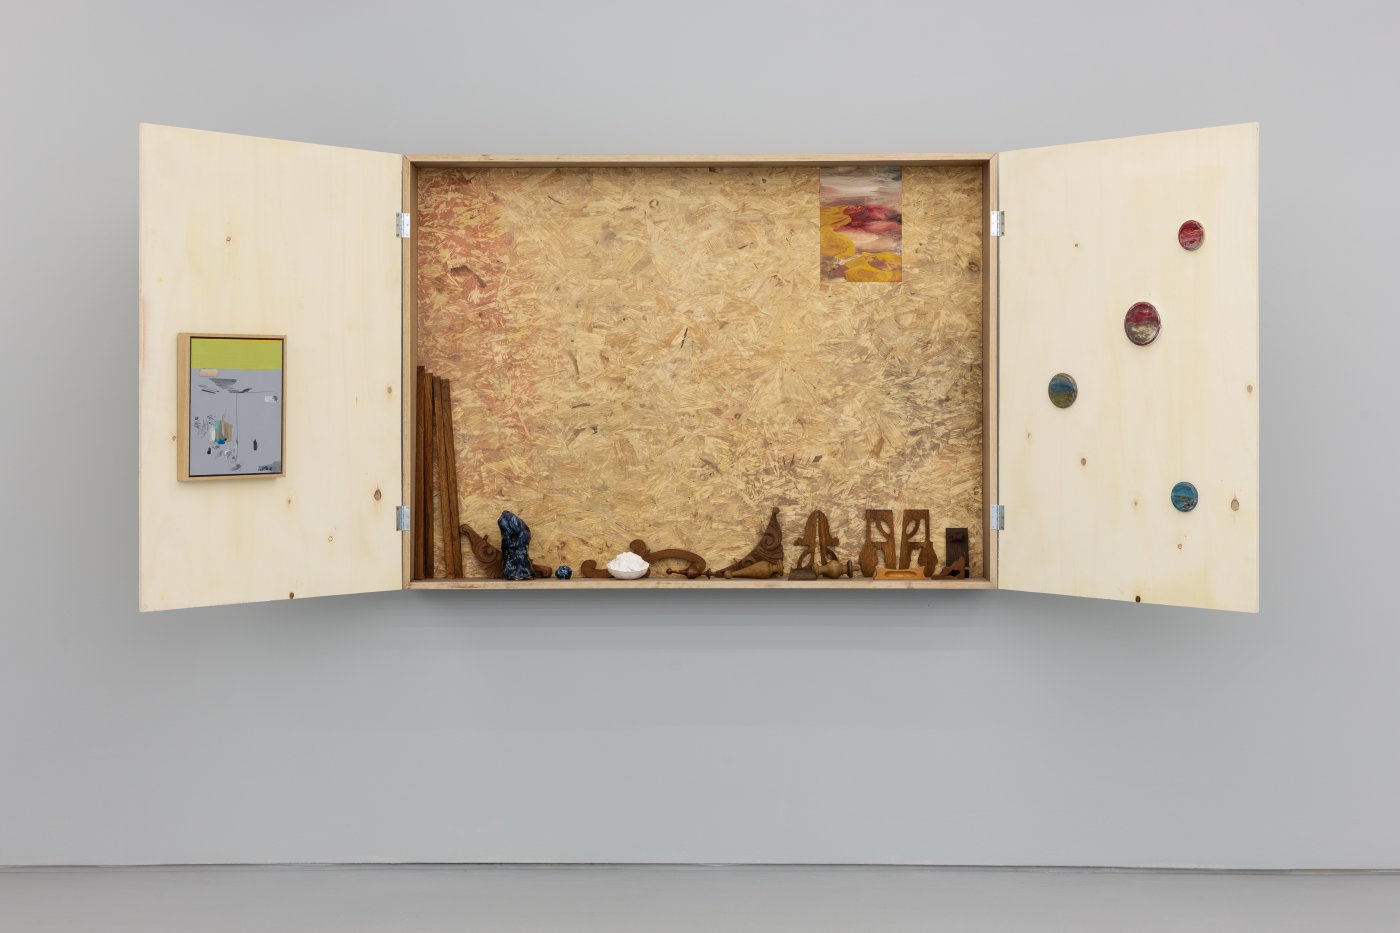 Susanne S. D. Themlitz, Inside. Perhaps., 2019-2022. Plaster, ceramics, wood and oil, charcoal, graphite on acrylic on canvas, on wood and on metal caps. 110 x 300 x 17 cm (open). Unique
